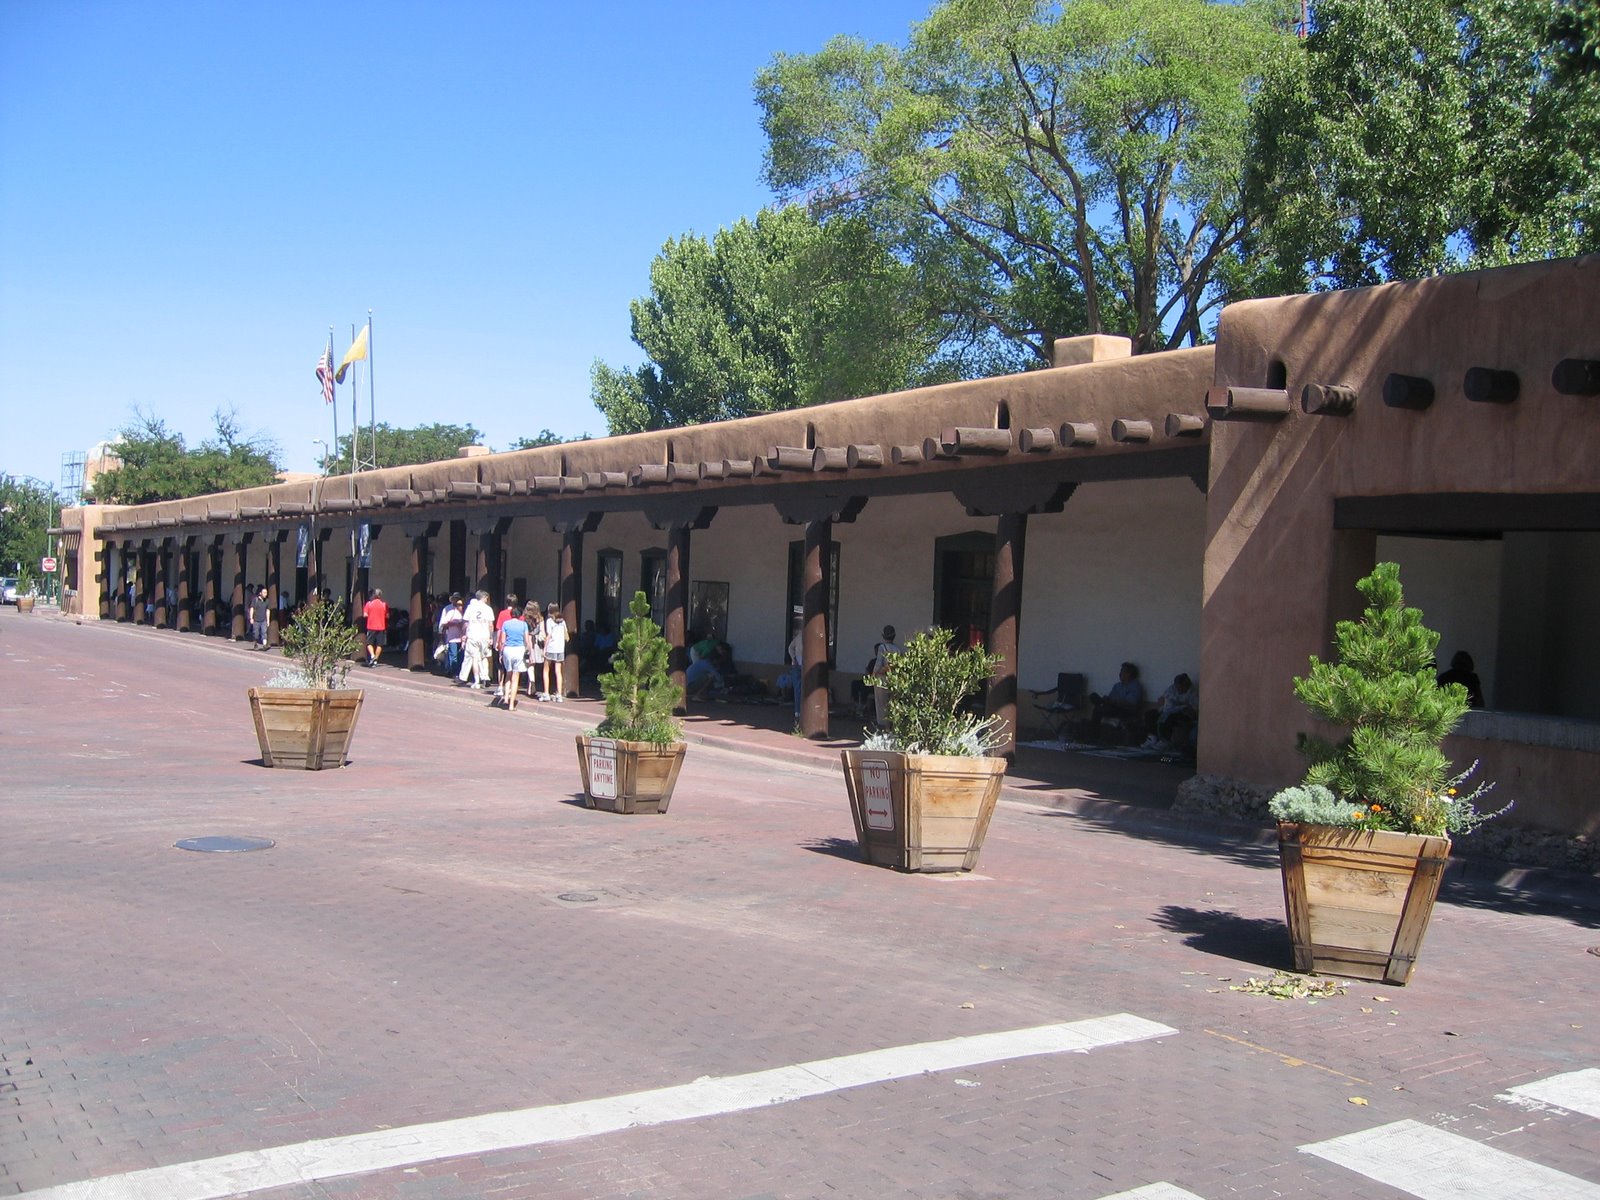 Palace of the Governors - Santa Fe